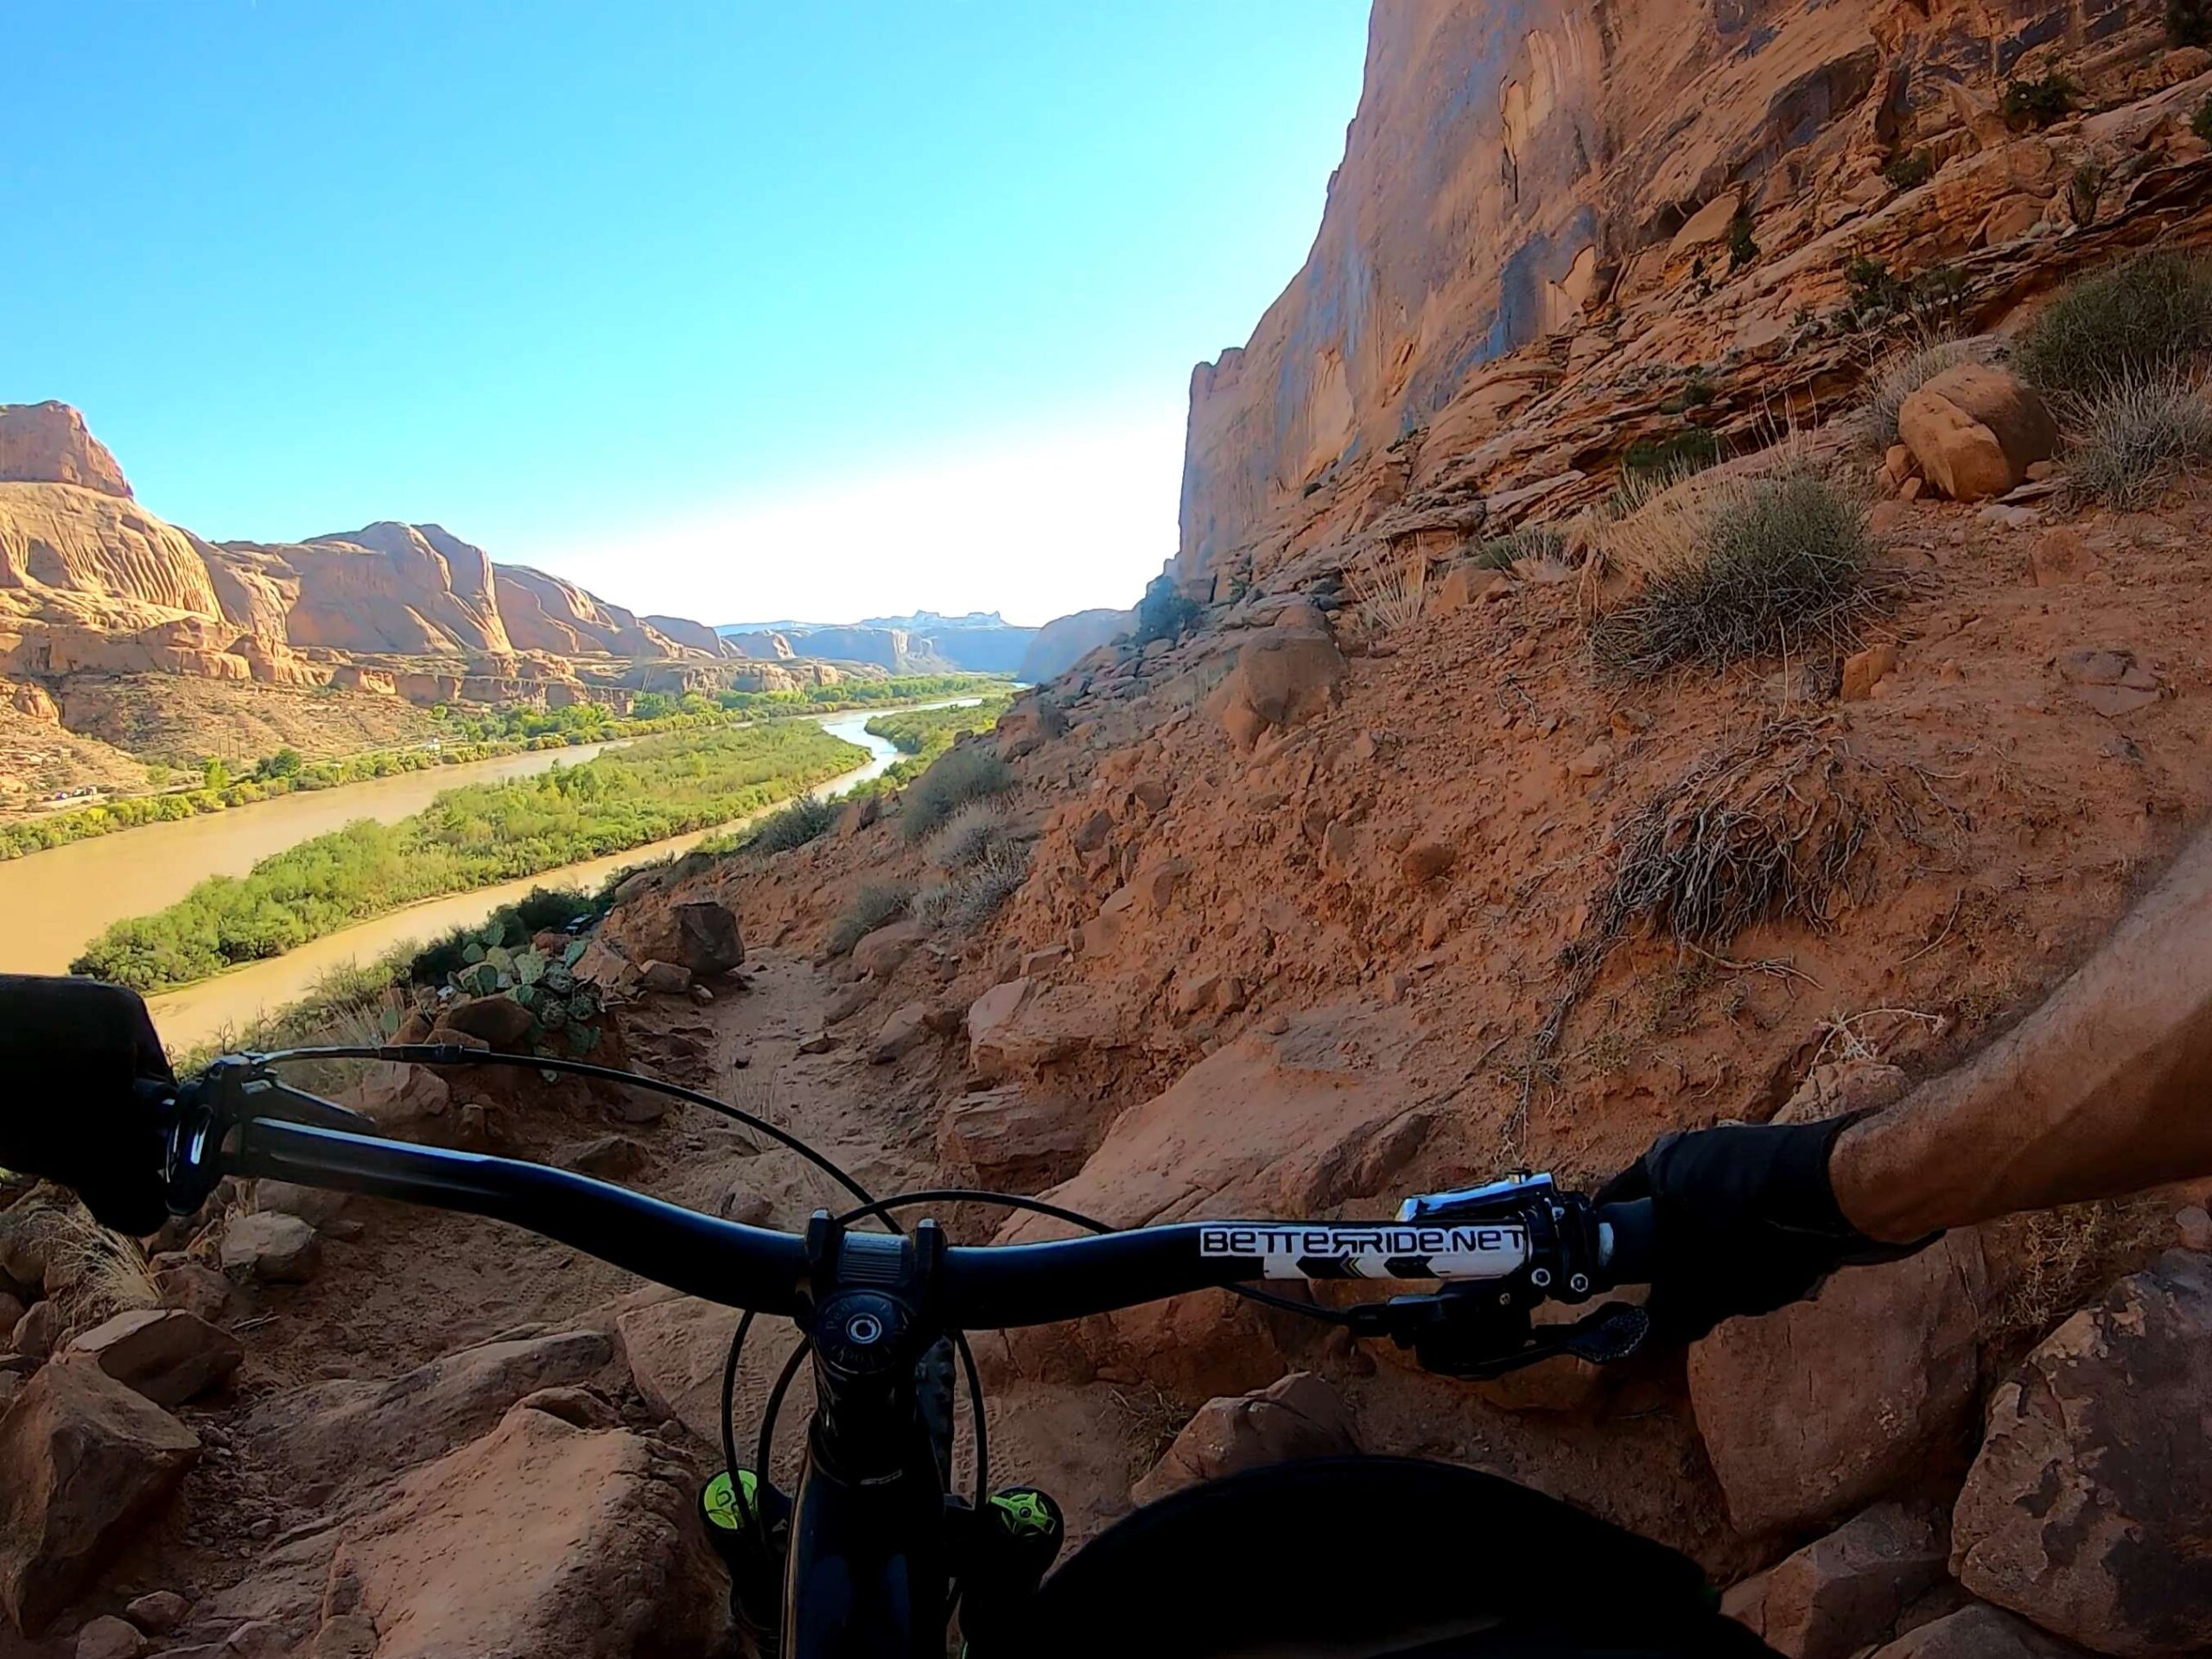 Challenging Mountain Bike Trails Should be Ridden with Skills, Not Balls MTB Video